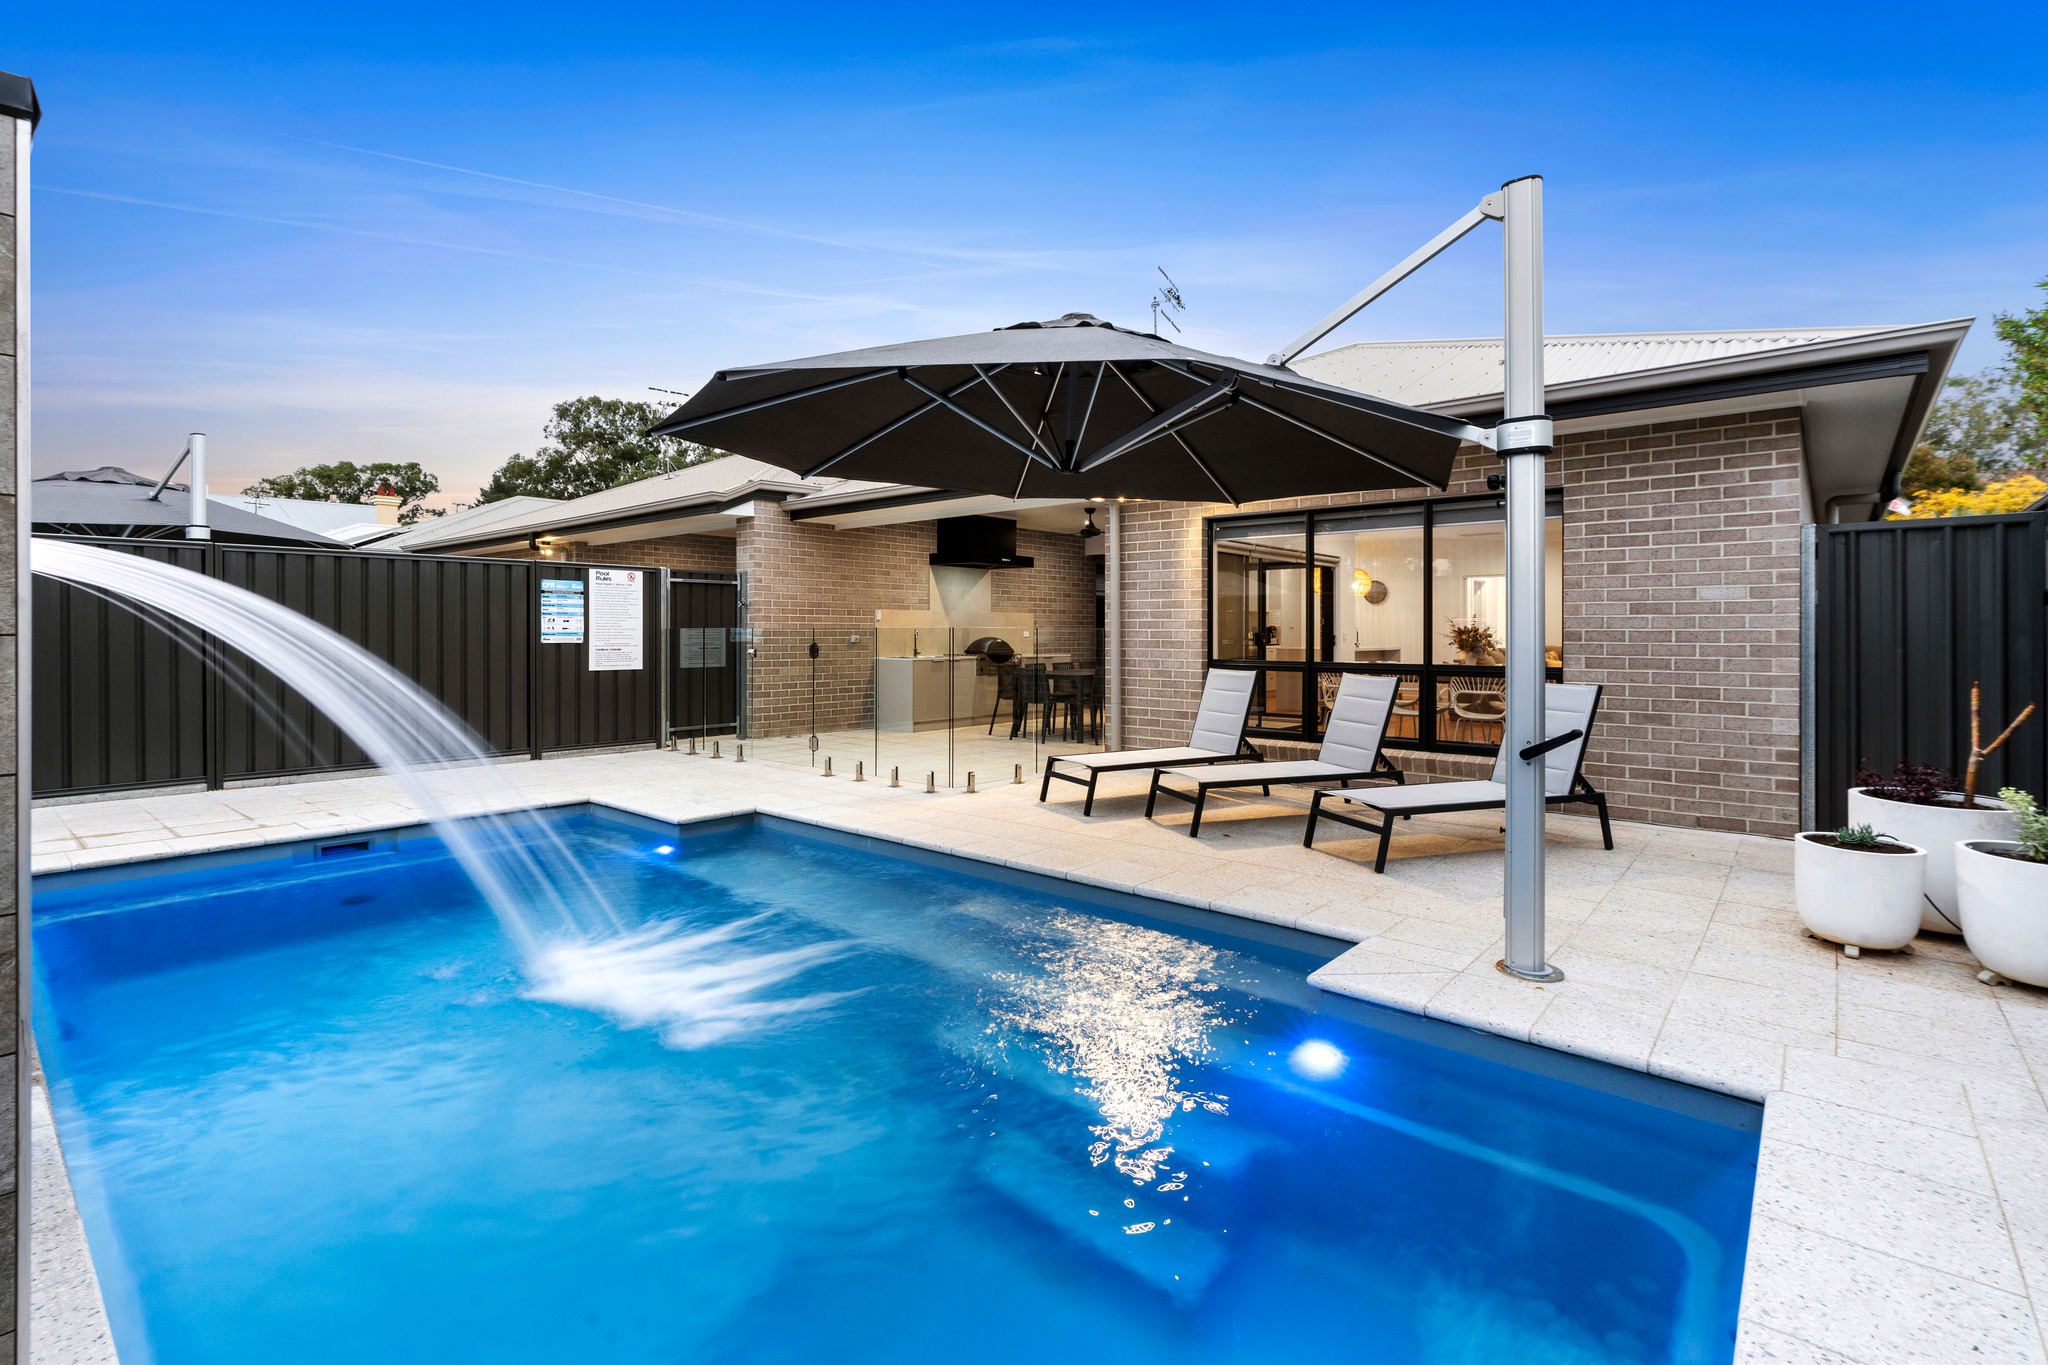 Win a Weekend Stay for 2 at Renmark River Villas’ brand new villas!